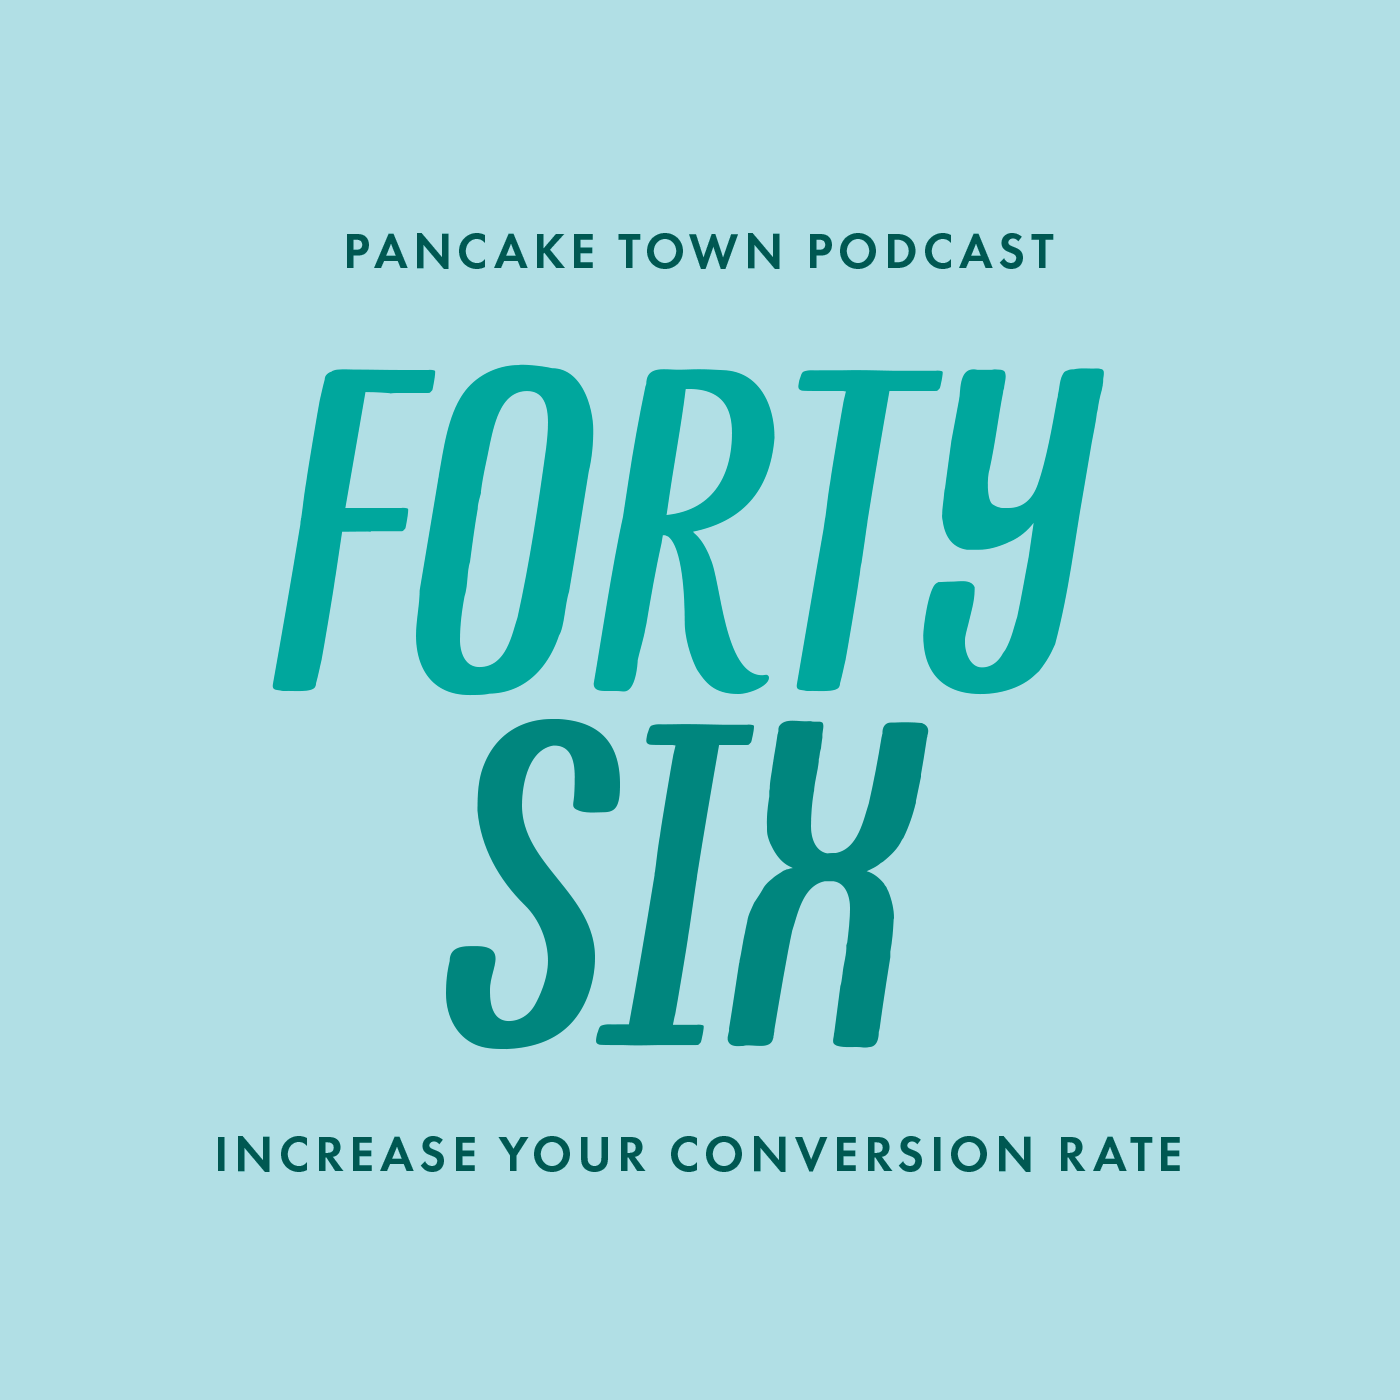 Episode 46 - Increase Your Conversion Rate